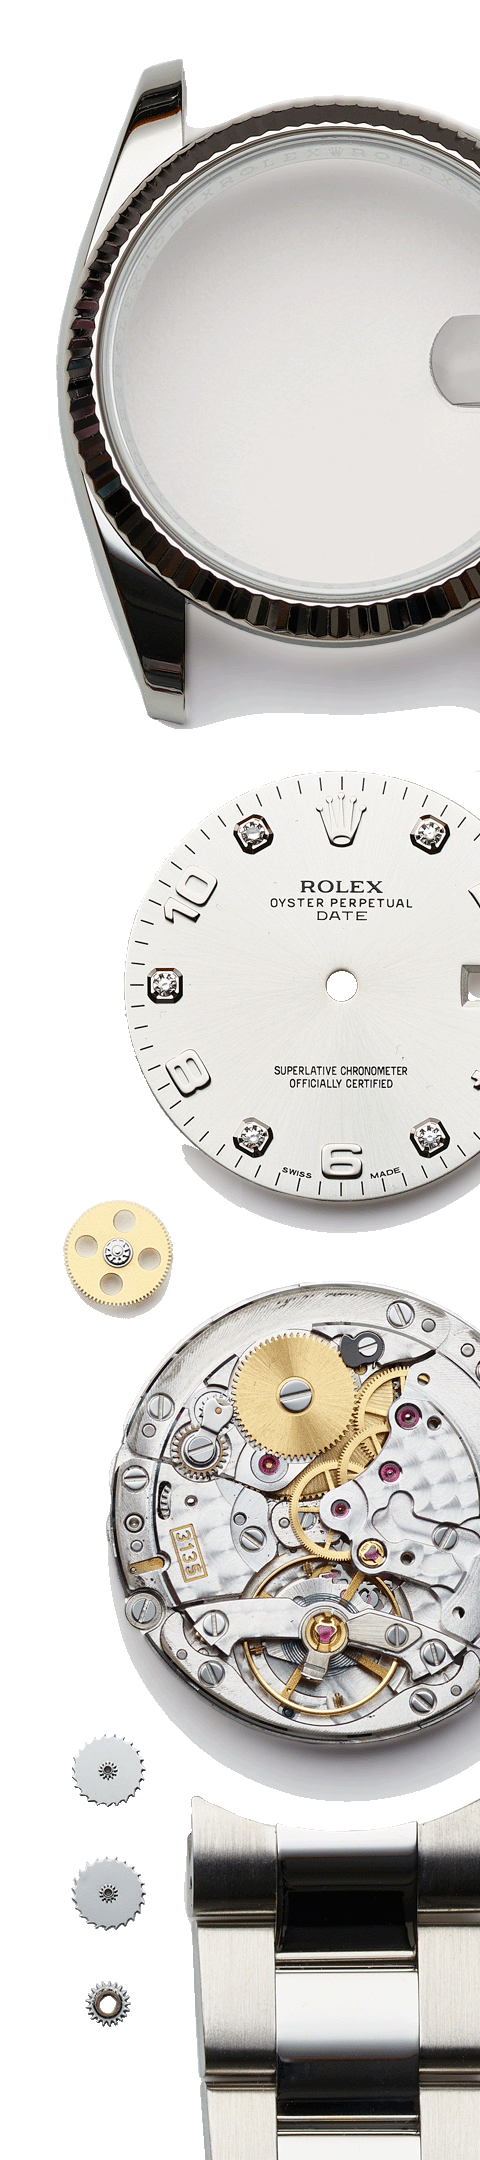 Dismantled Rolex watch and bracelet